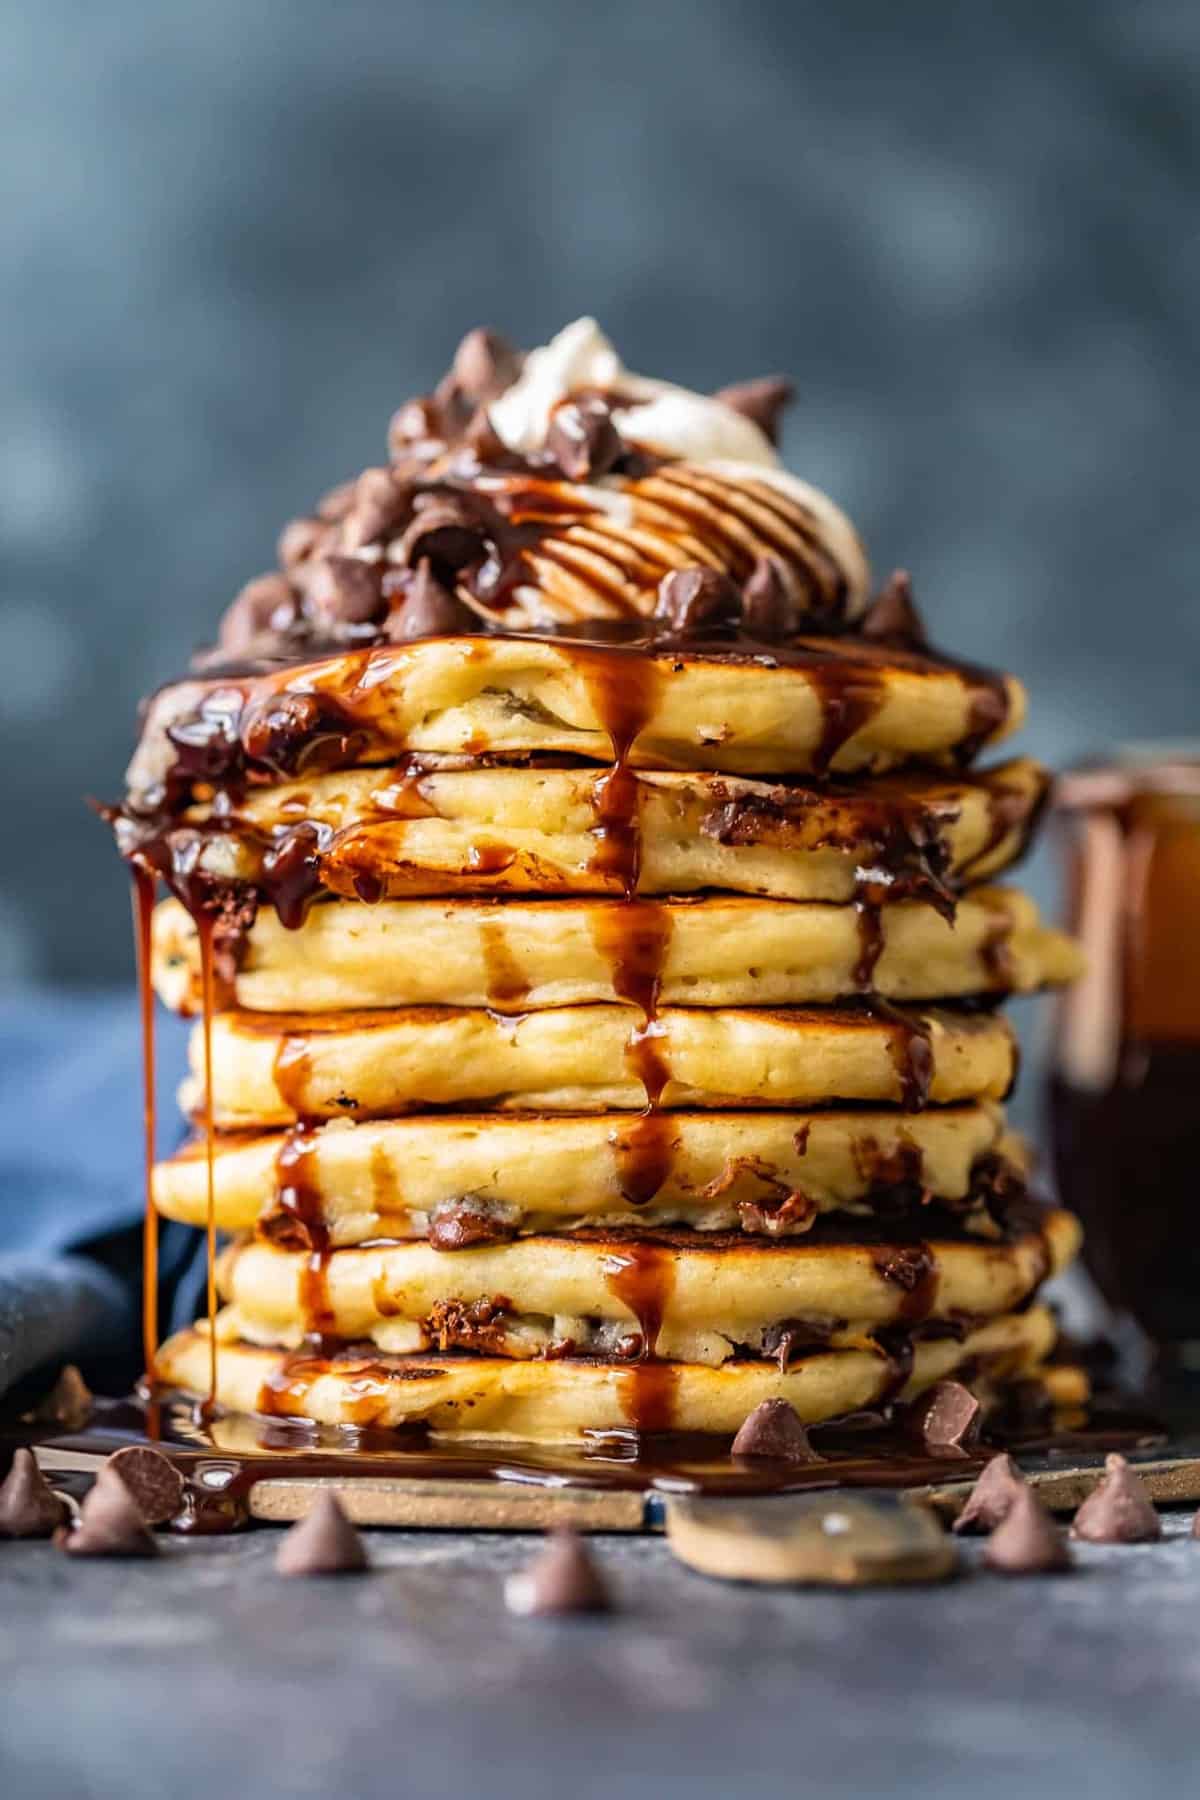 A stack of chocolate chip pancakes